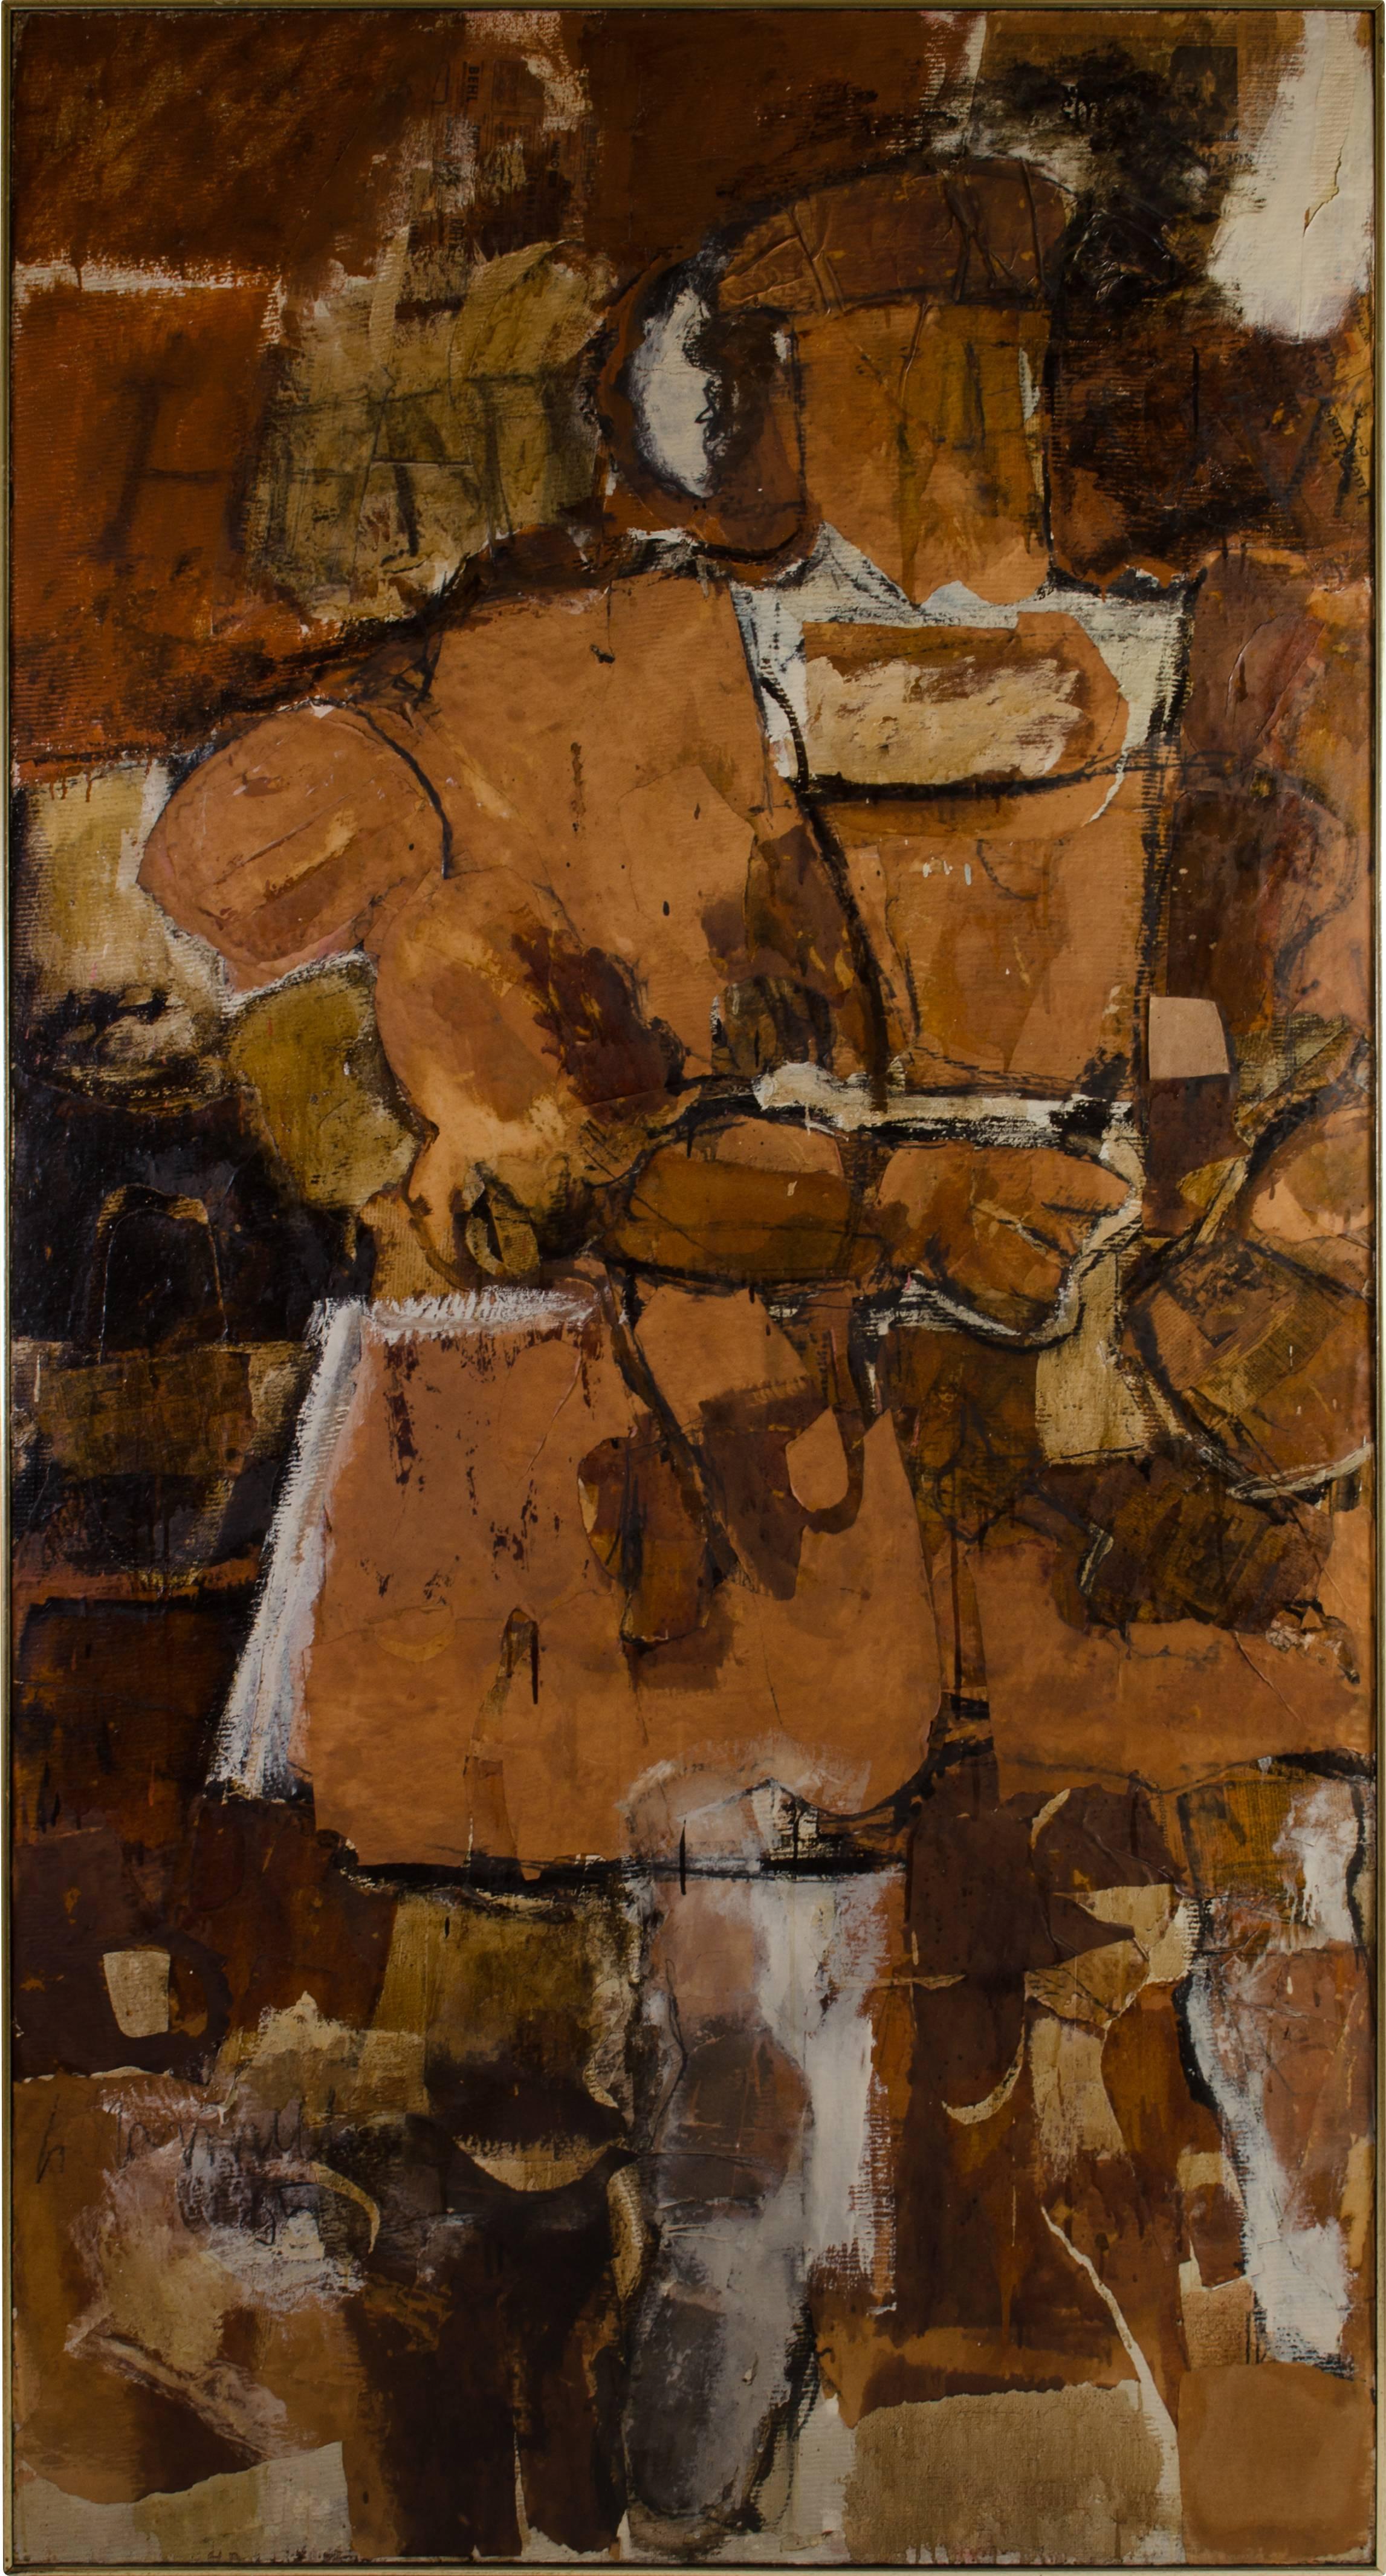 A stellar example of Hilda O'Connell's early work dated 1965. This generously sized diptych features two larger than life historical figures; their identity becomes increasingly evident as the piece is viewed a bit closer. O'Connell medium is an